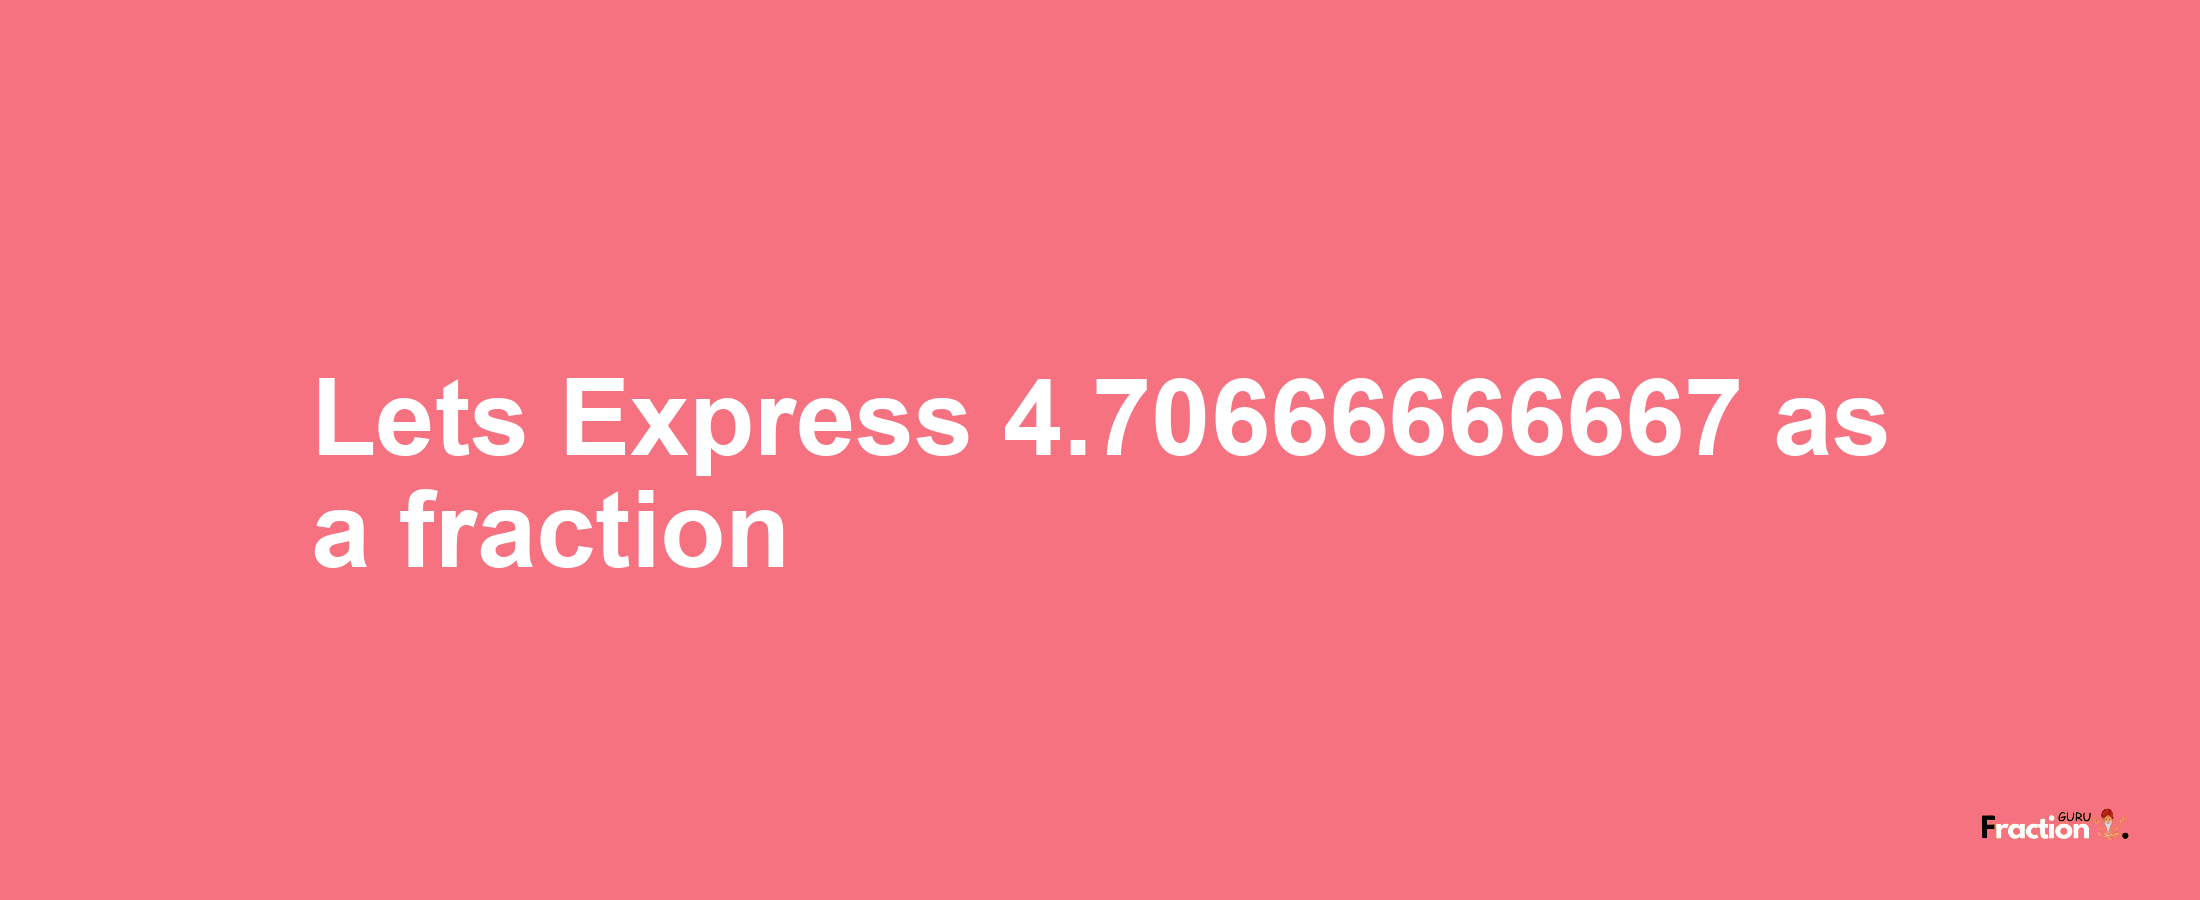 Lets Express 4.70666666667 as afraction